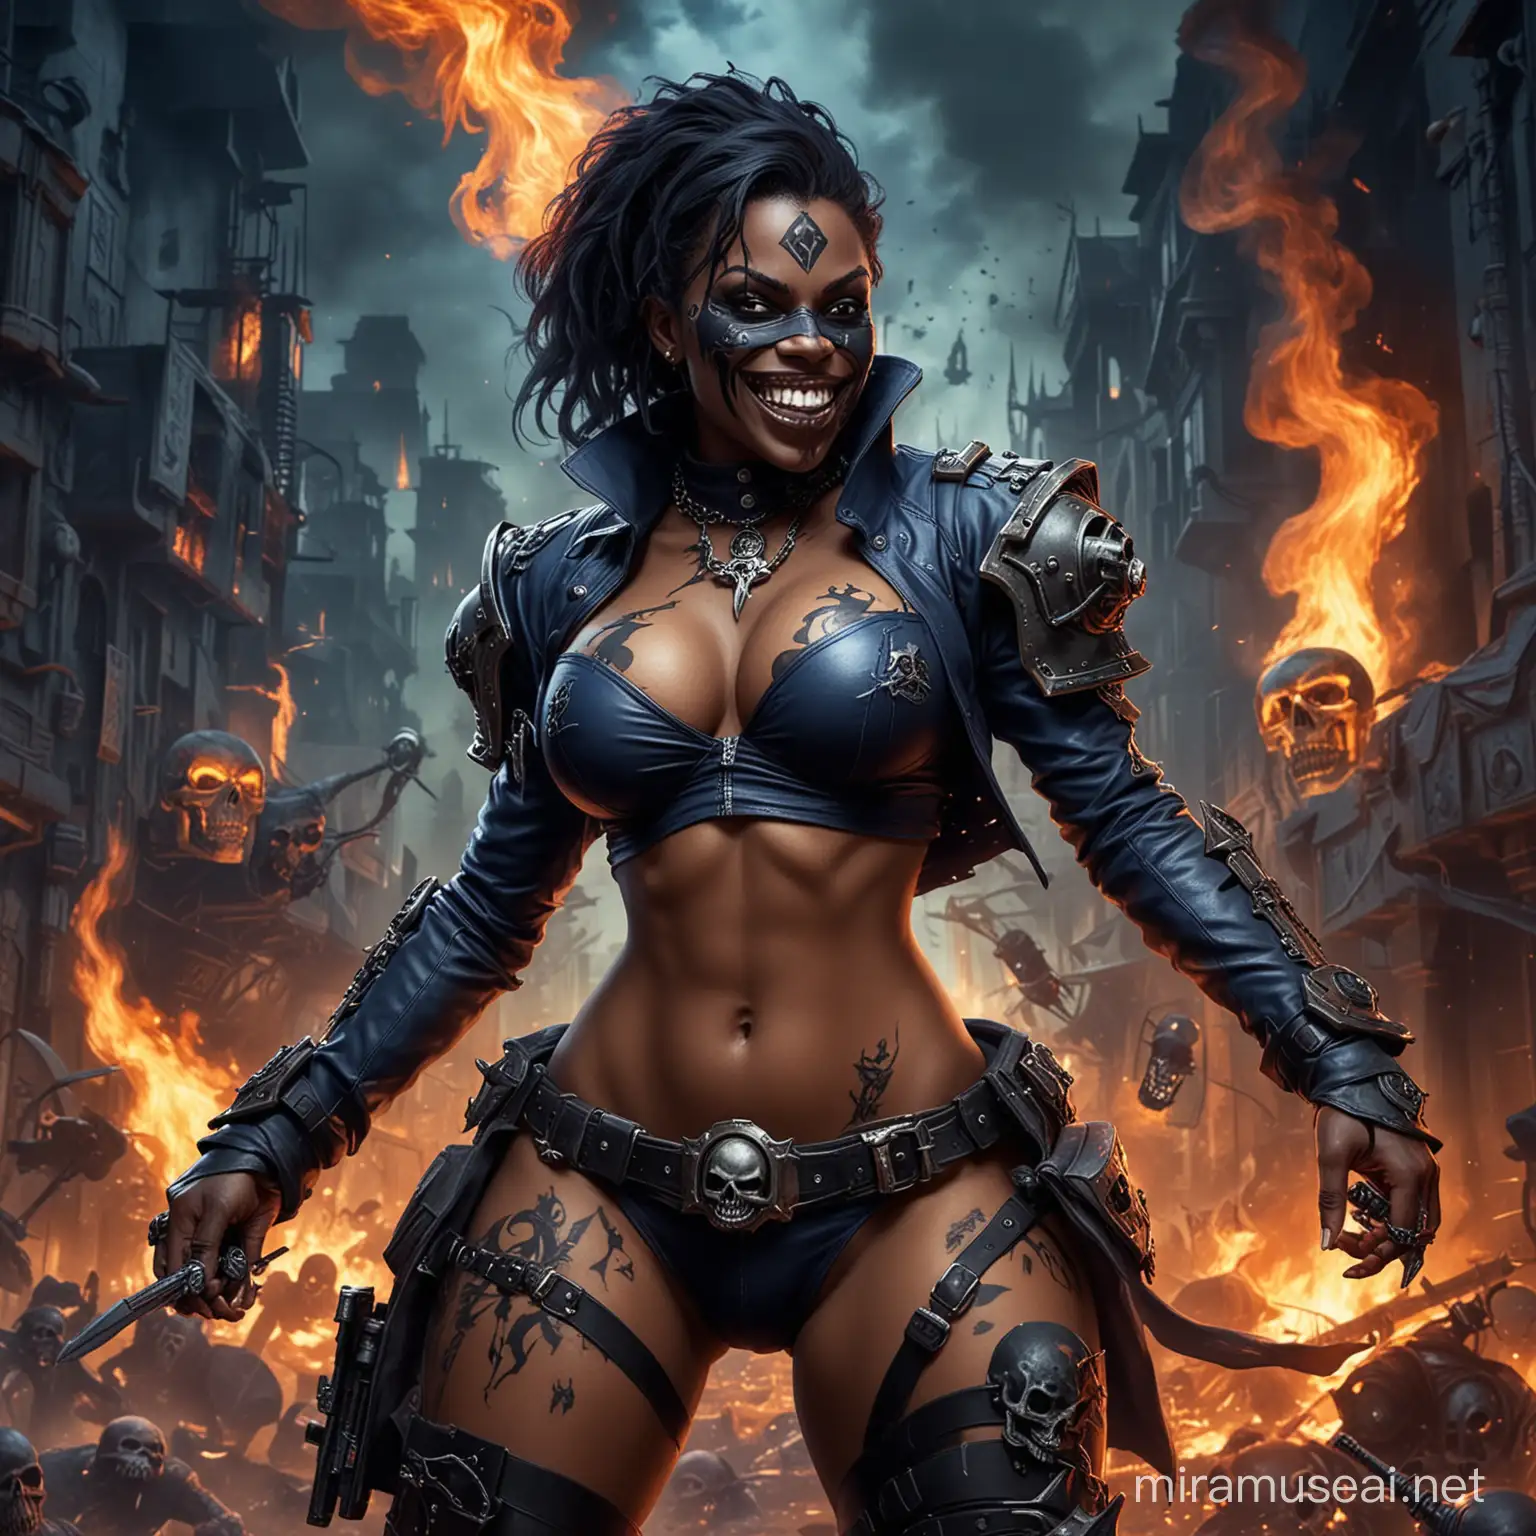 Seductive Female Warhammer 40k Cultist Leader in Burning Chaos Background